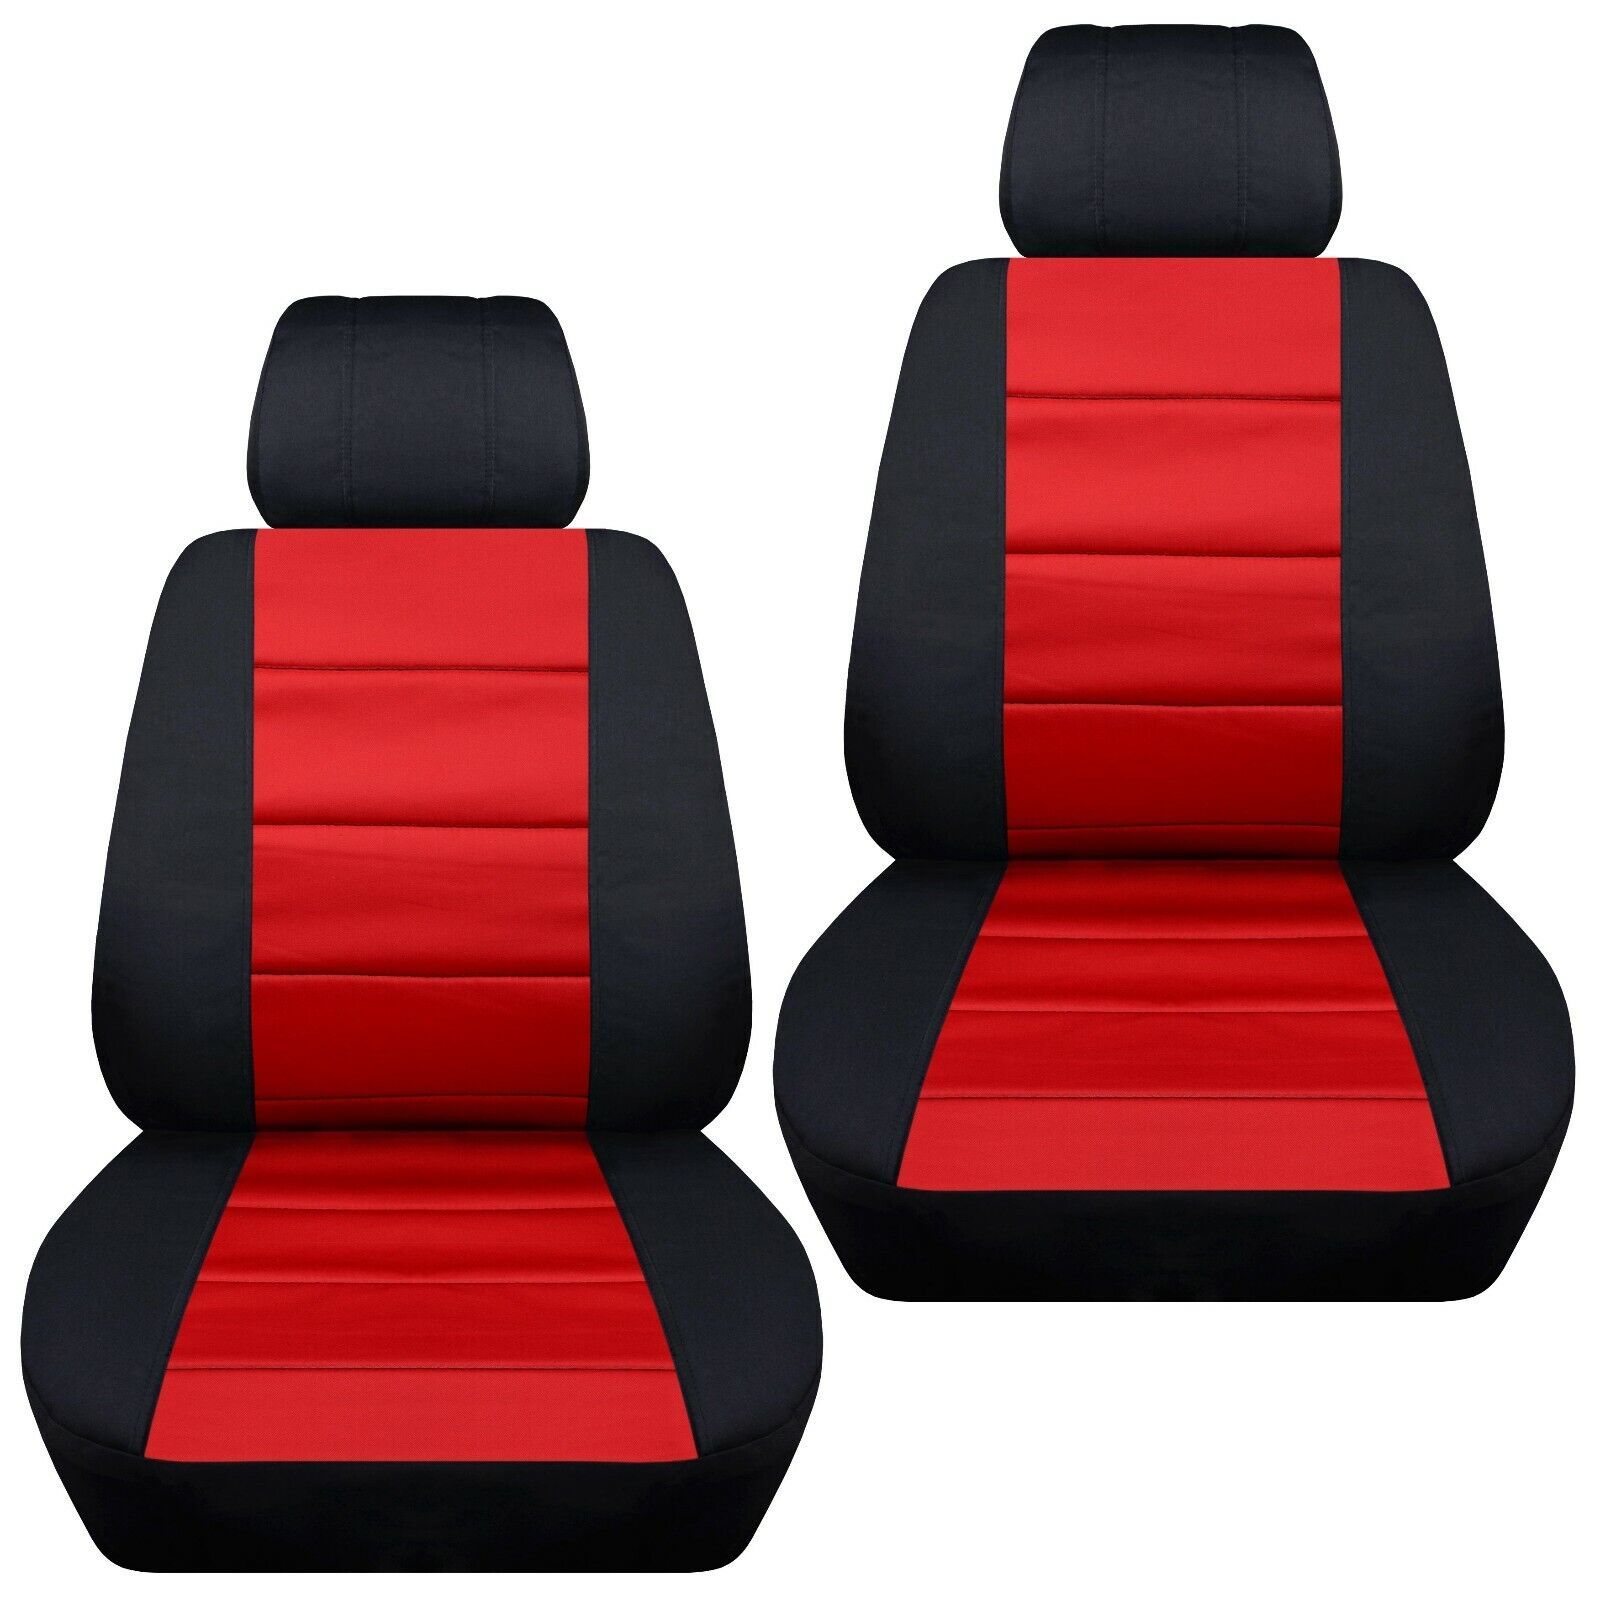 Primary image for Front set car seat covers fits Ford Ranger 2019-2021   Choice of 4 colors